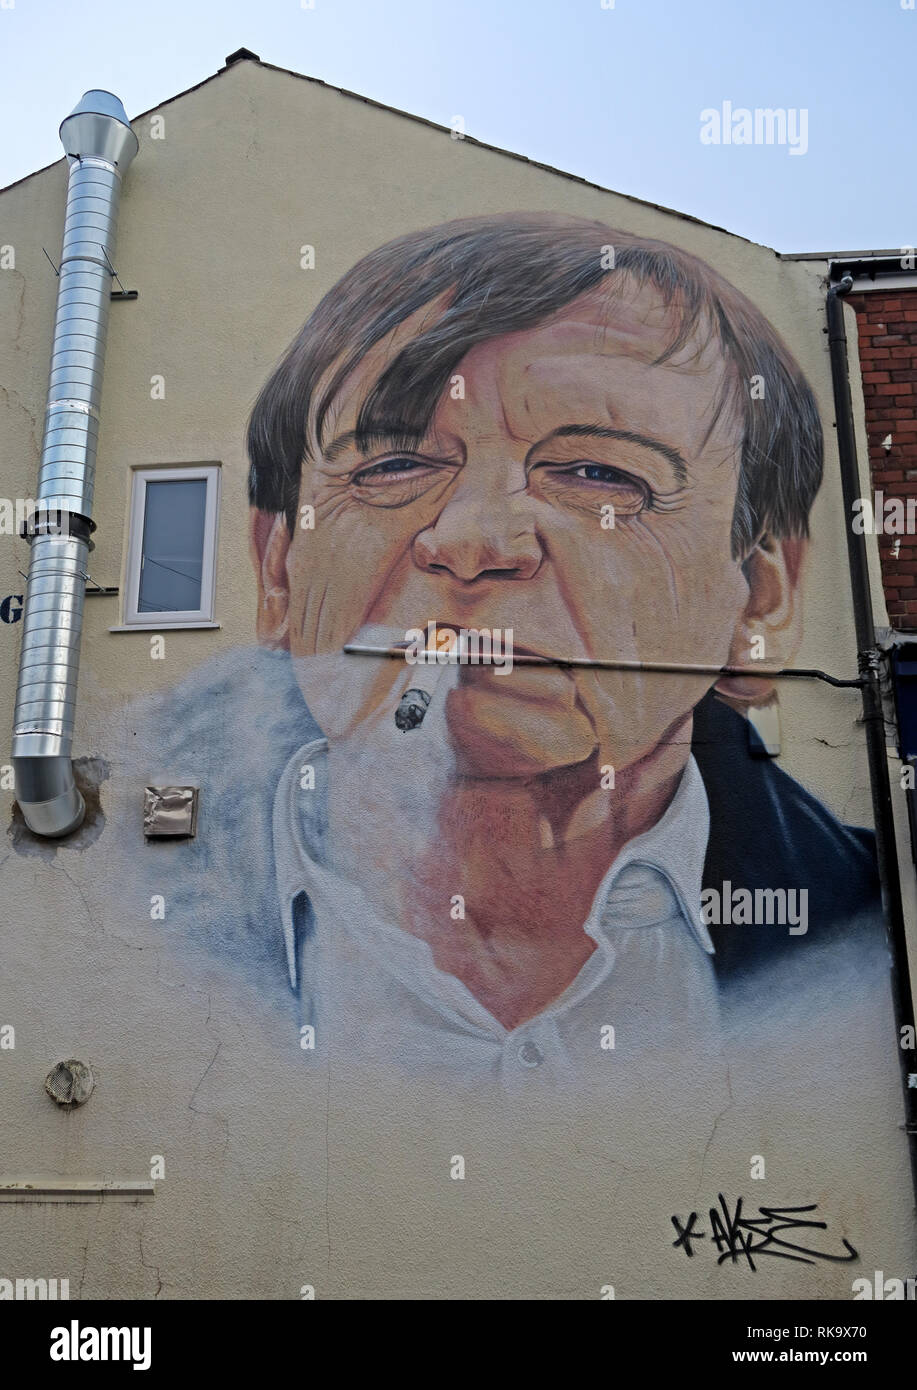 "Fear is something I try not to absorb",Clifton Road, Prestwich, The Fall, Mark E Smith artwork, 8 Clifton Road, Prestwich, Bury M25 3HQ, England Stock Photo